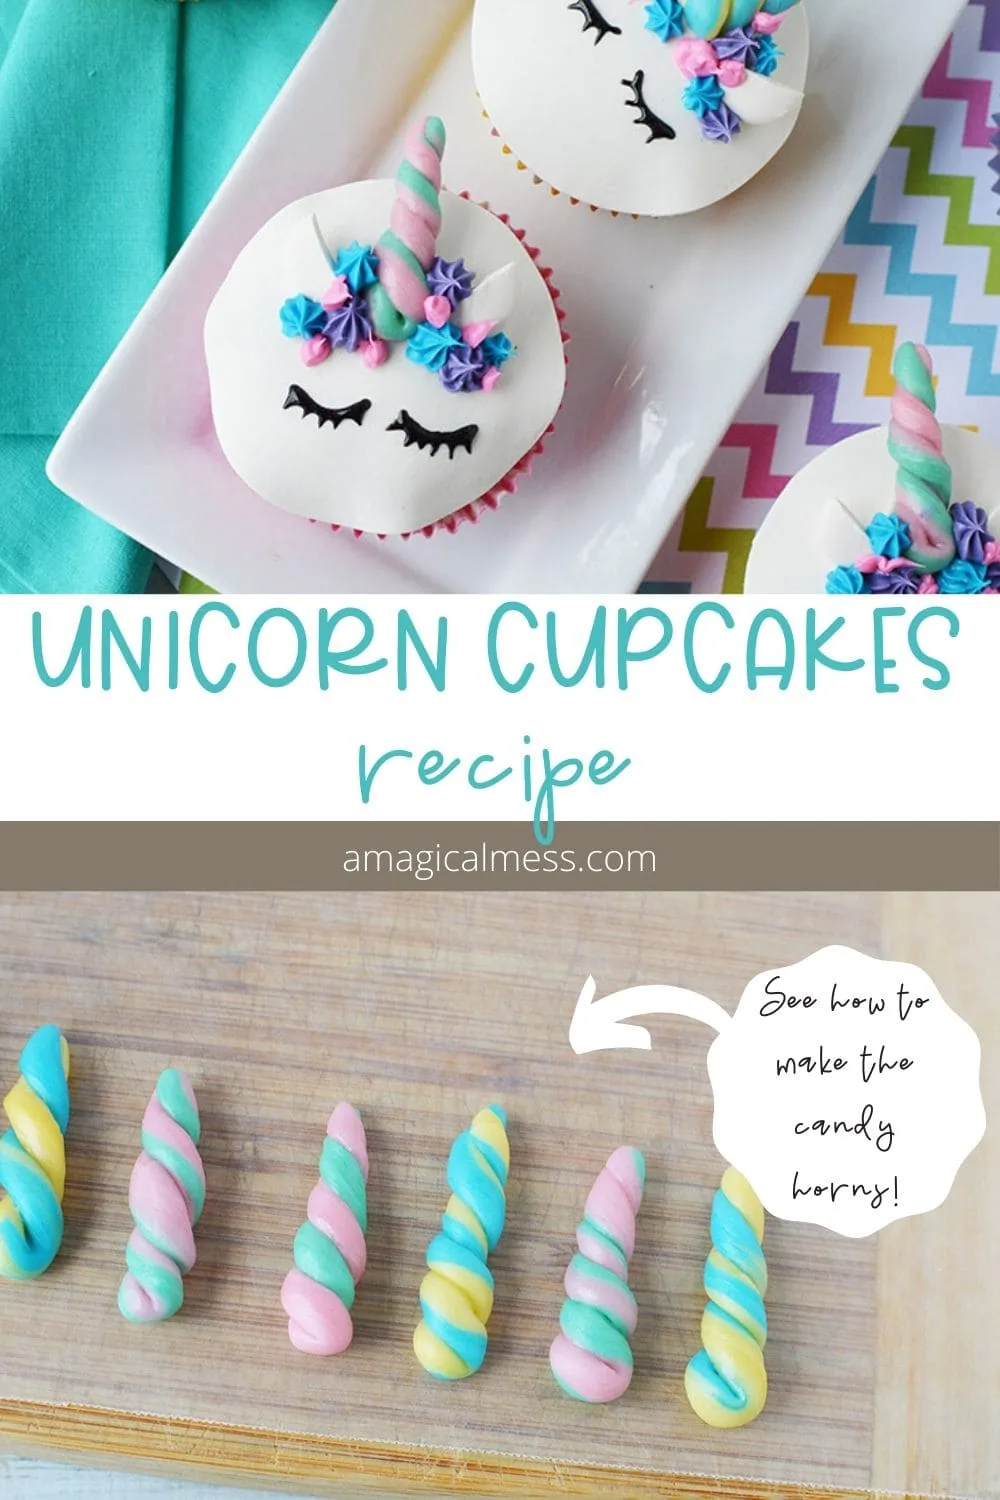 Unicorn cupcakes and candy horns.